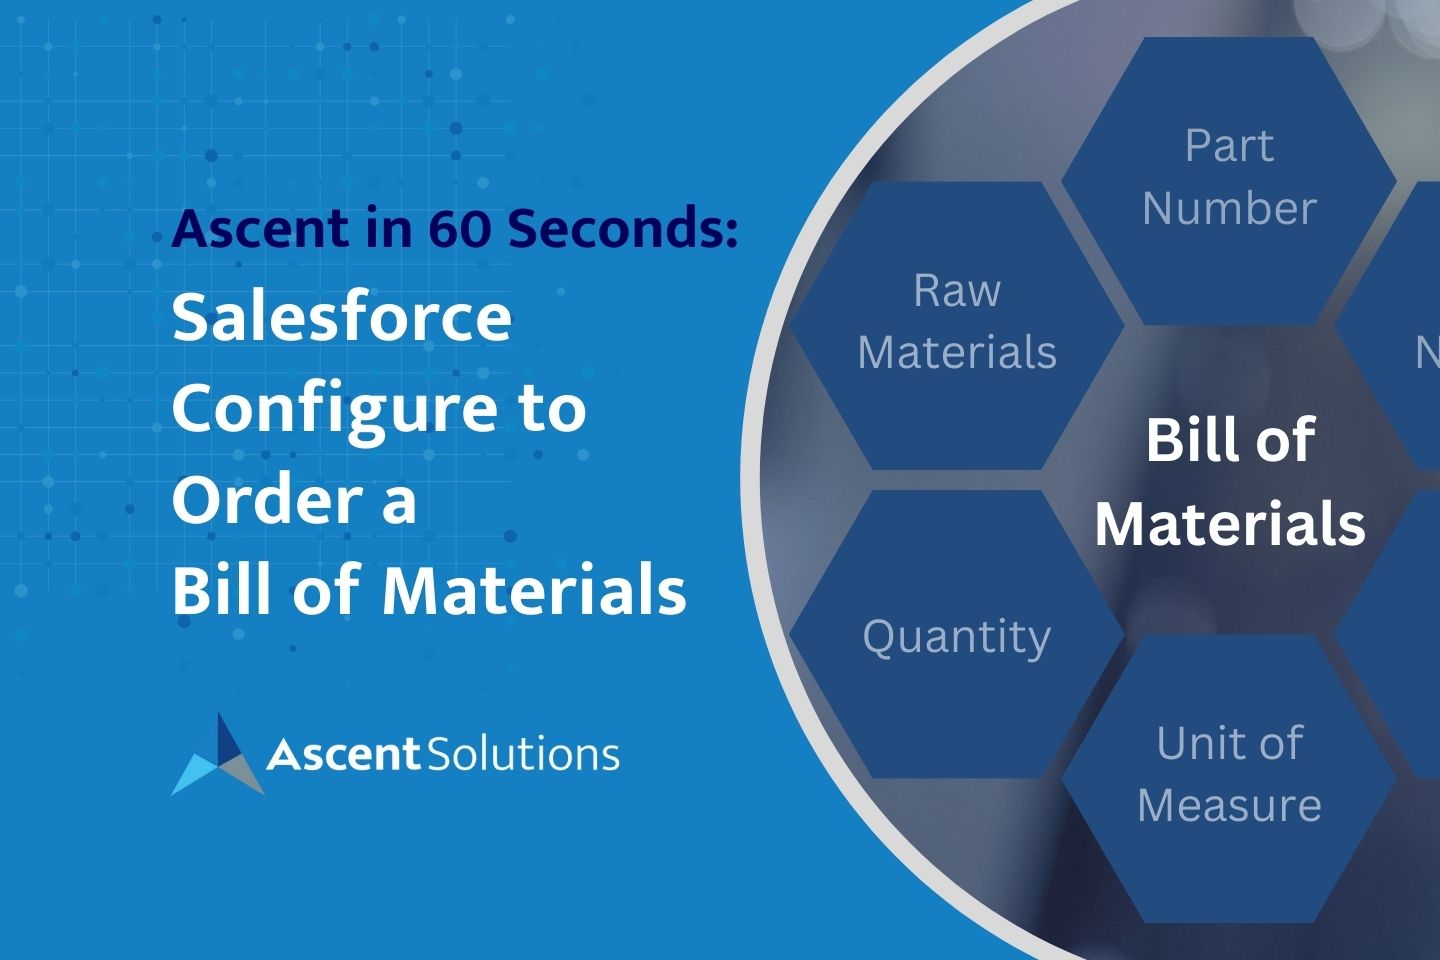 Ascent in 60 Seconds Salesforce Configure to Order a Bill of Materials